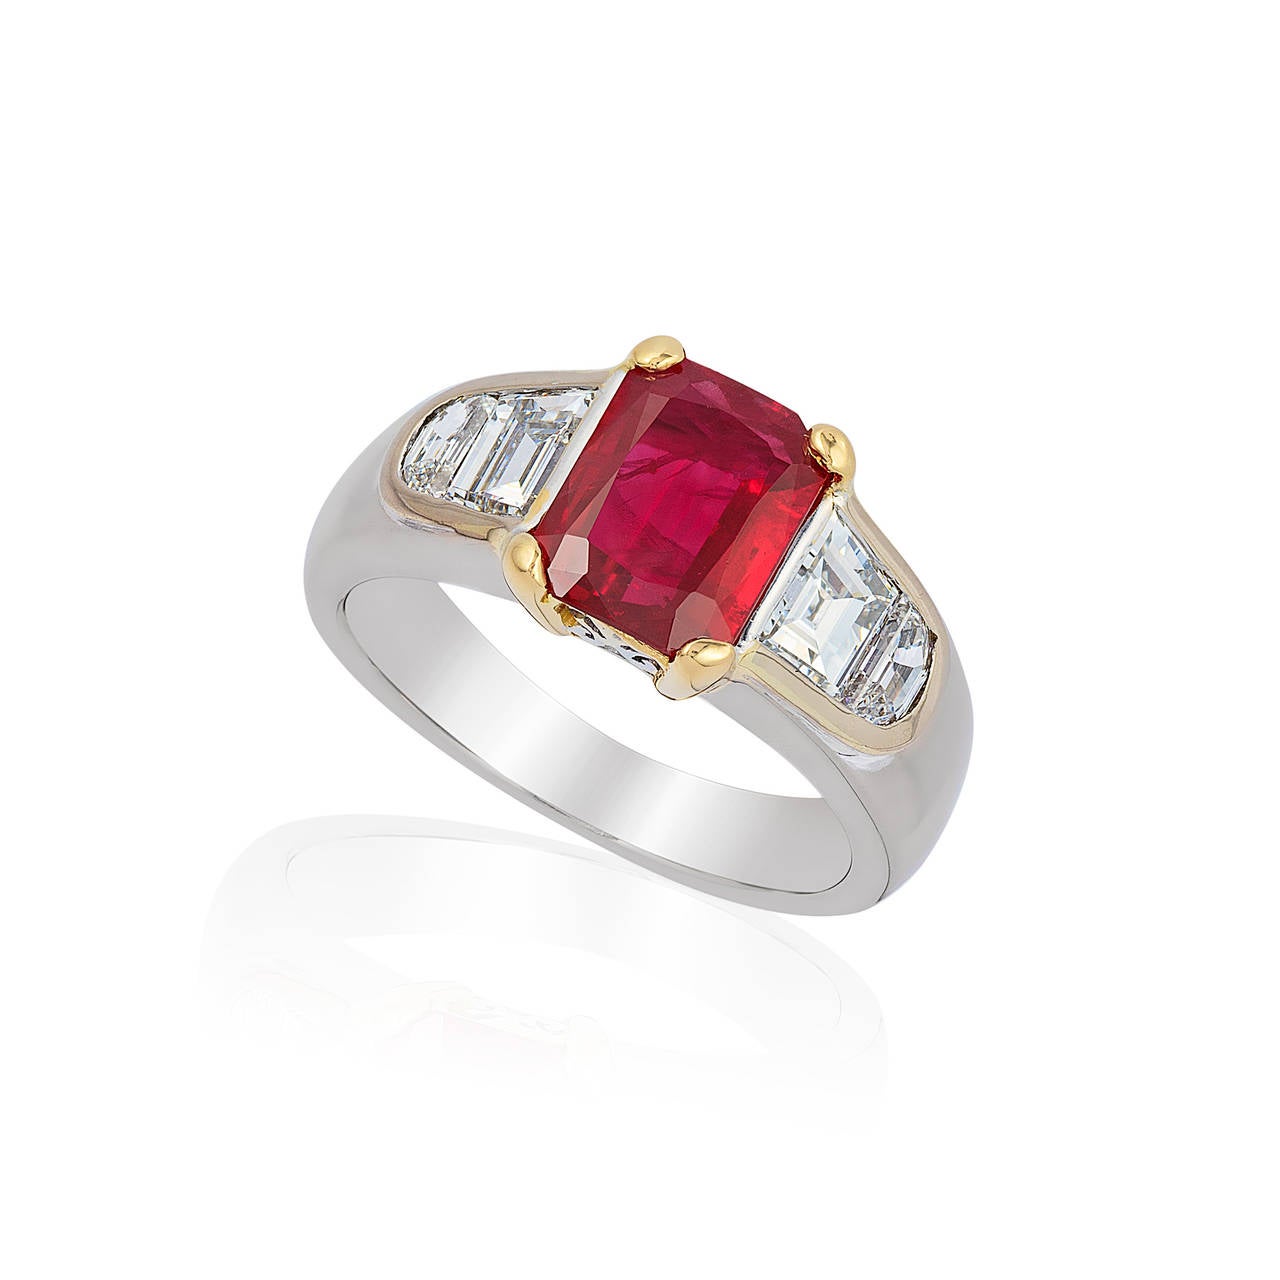 Exceptional Ruby and Diamond ring set in 18k White and Yellow gold
Size 4 3/4
Ruby 2 carats octagonal GIA certified
2 trapezoid diamonds .85cts color F quality VS
2 half moon diamonds .35cts color F quality VS